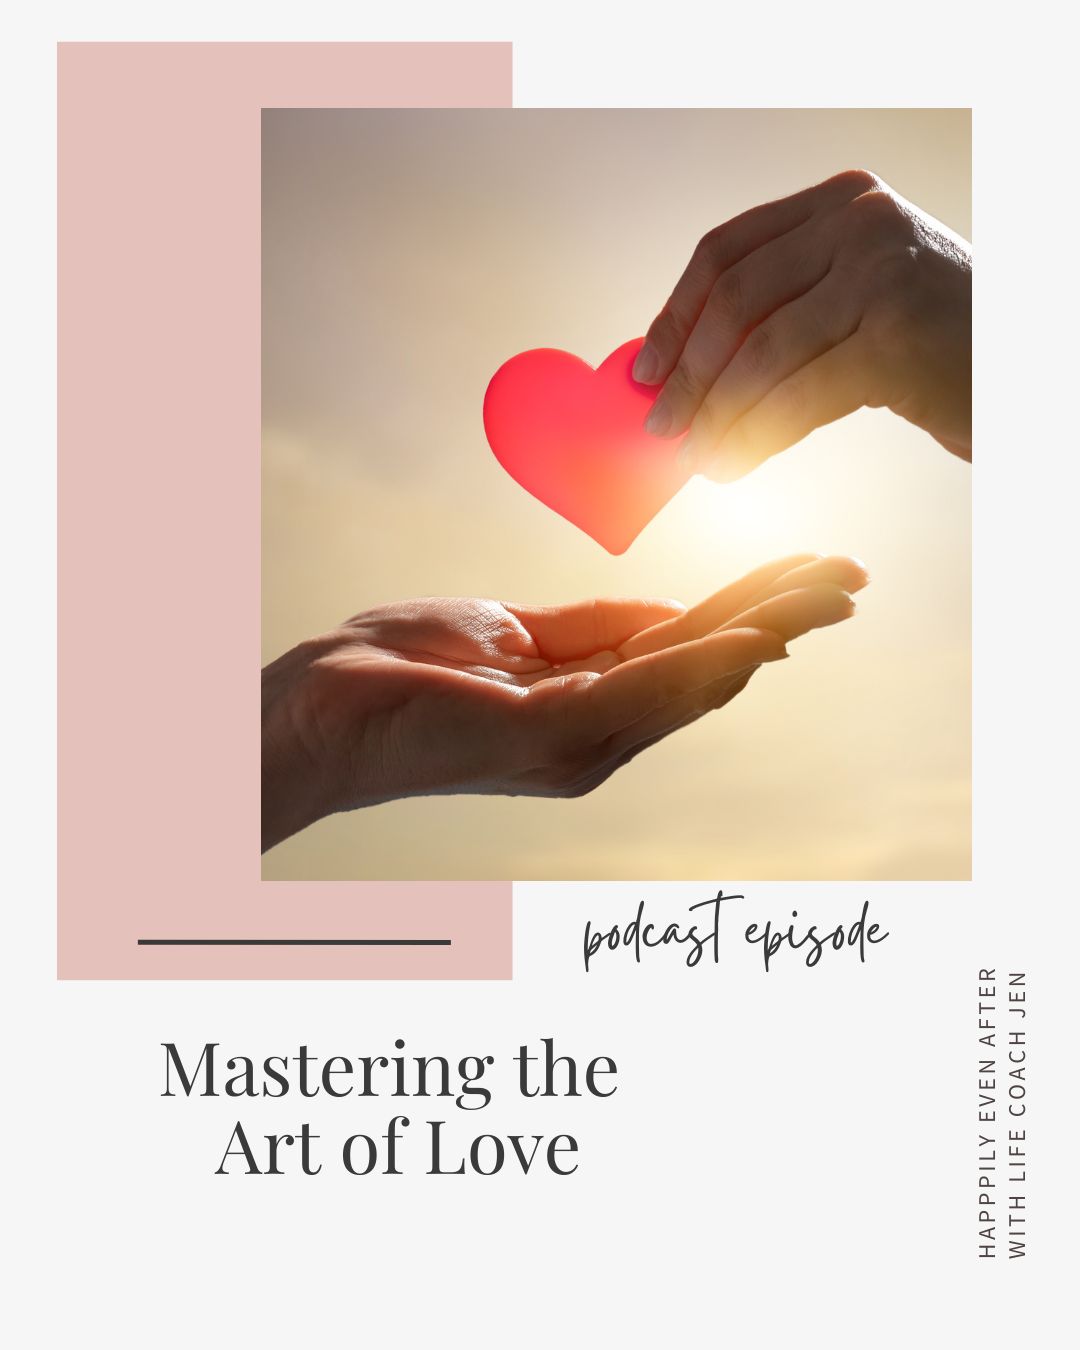 Two hands holding a red heart shape against a sunlit background, with text for a podcast episode titled "mastering the art of love.